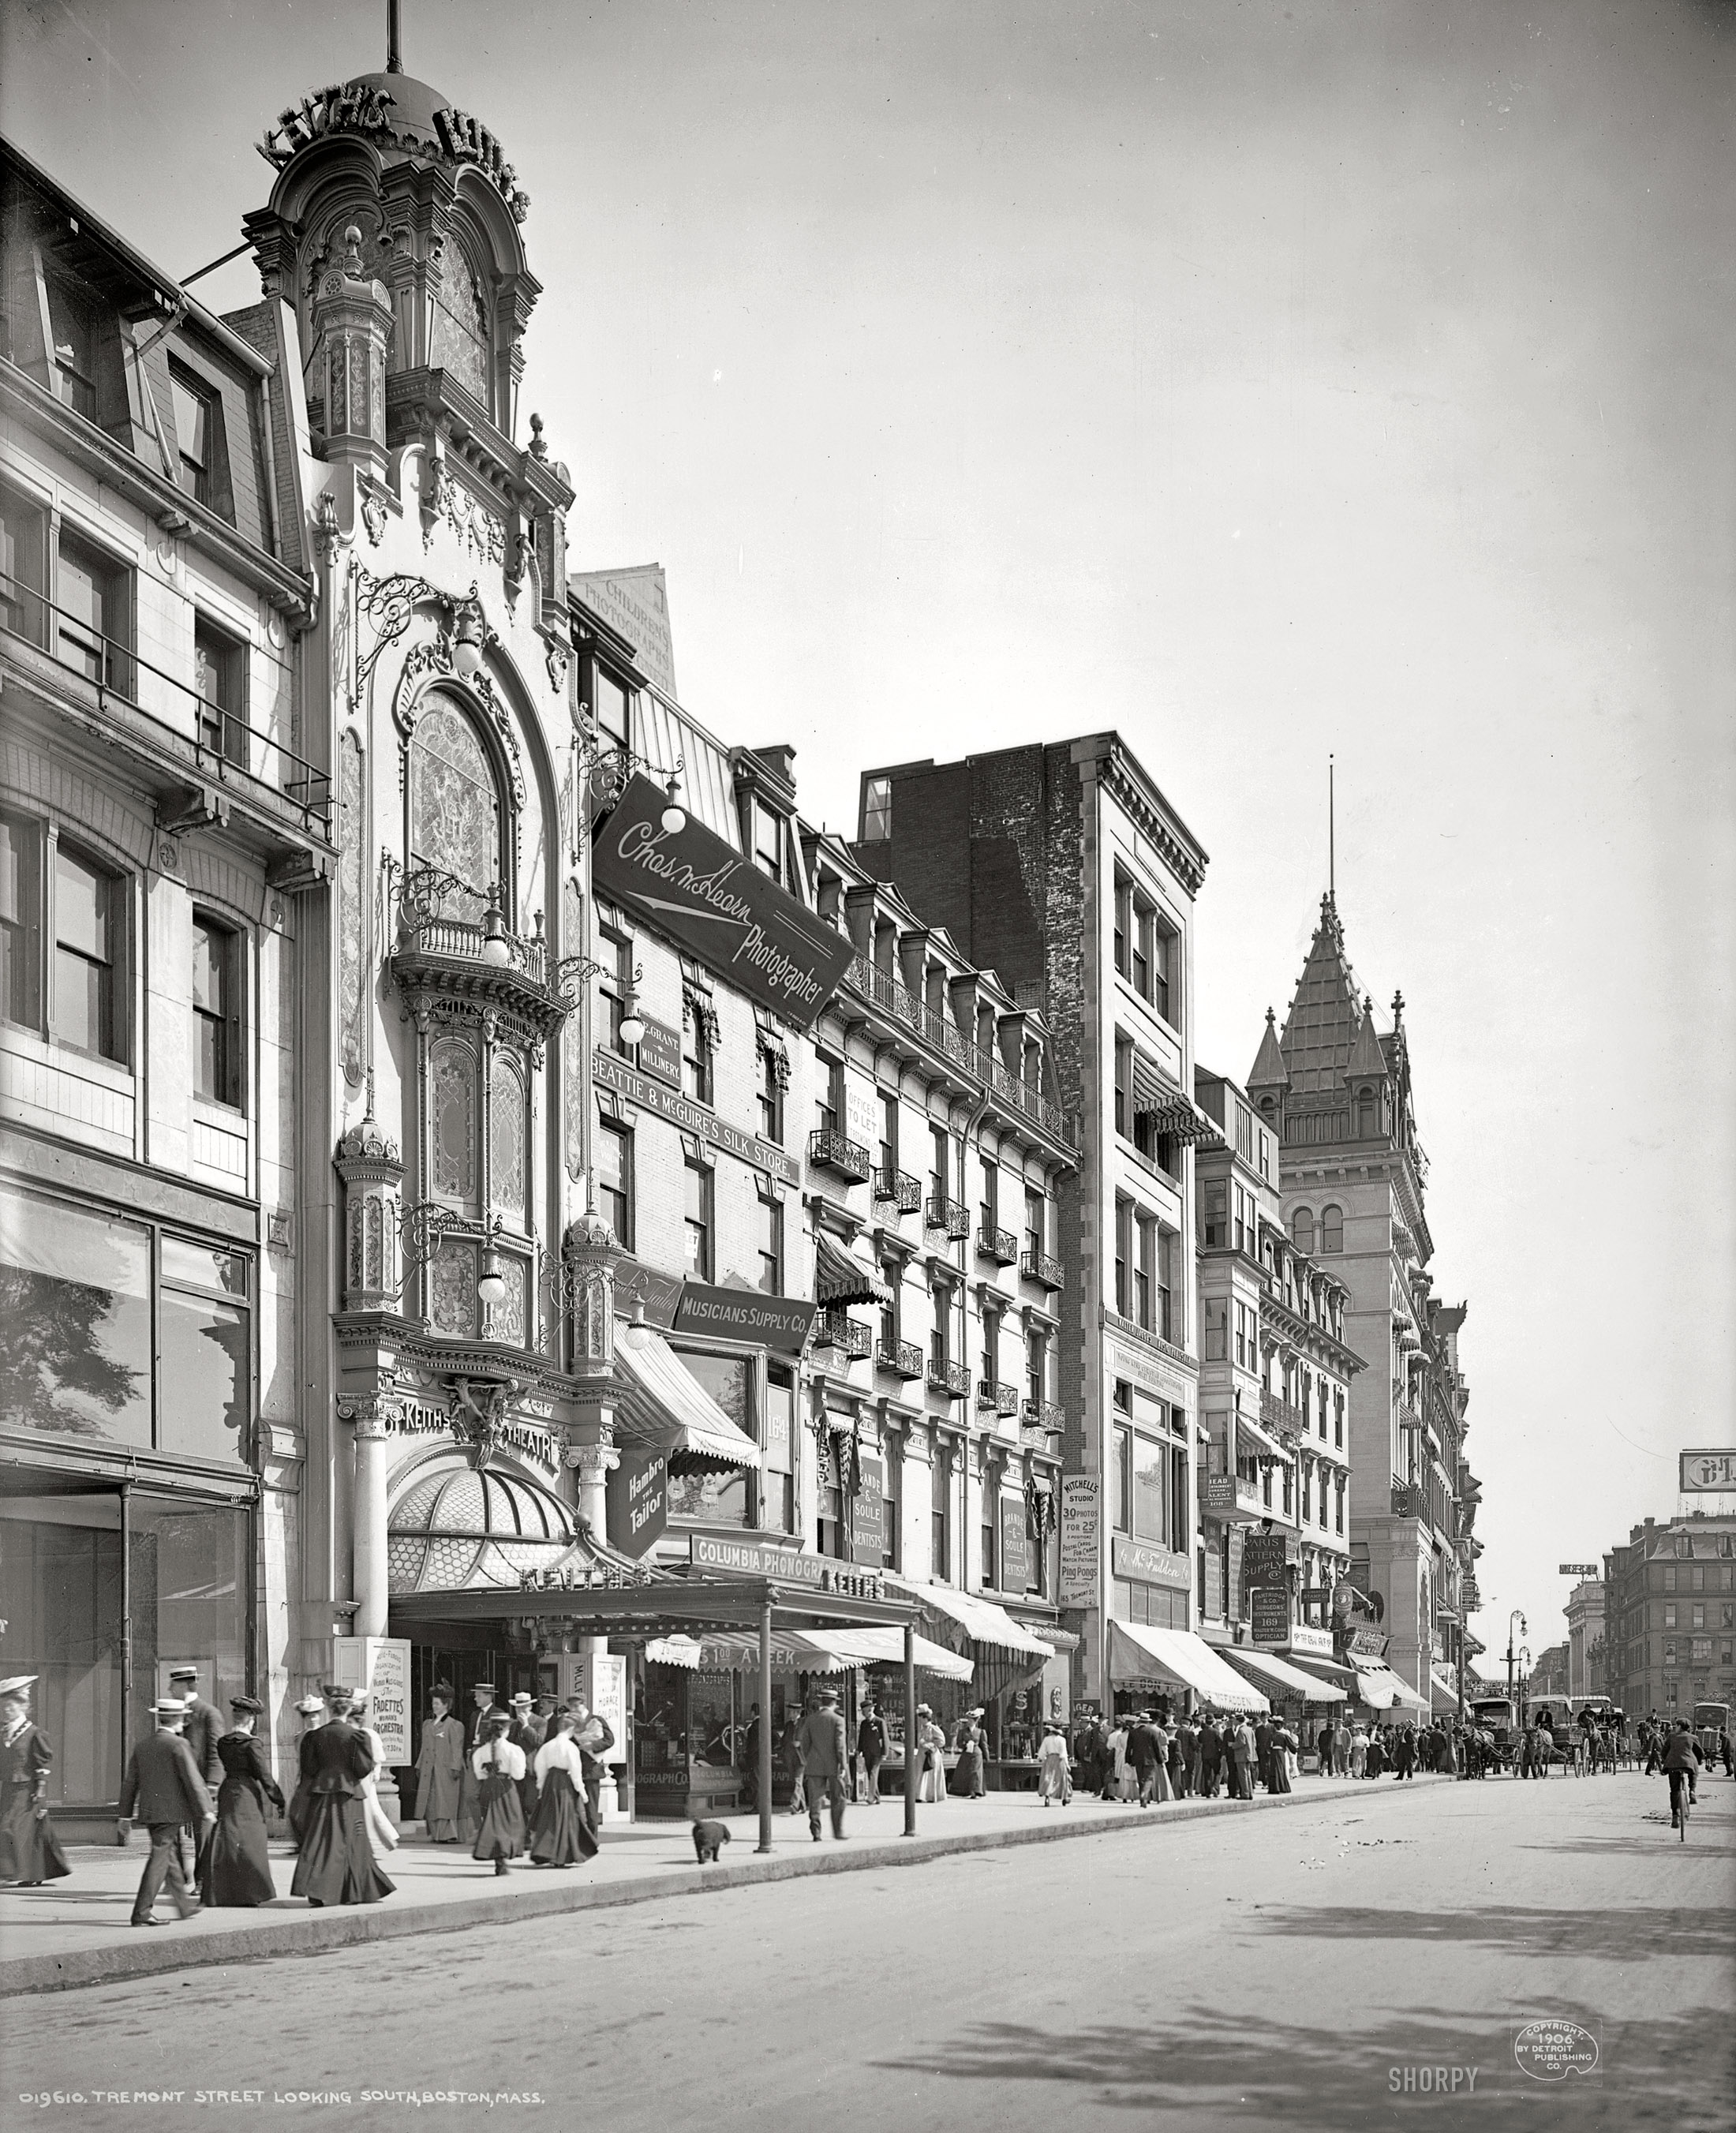 Boston, Massachusetts, circa 1906. "Tremont Street Bldg., looking south from Keith's Theatre." Detroit Publishing Co. glass negative. View full size.